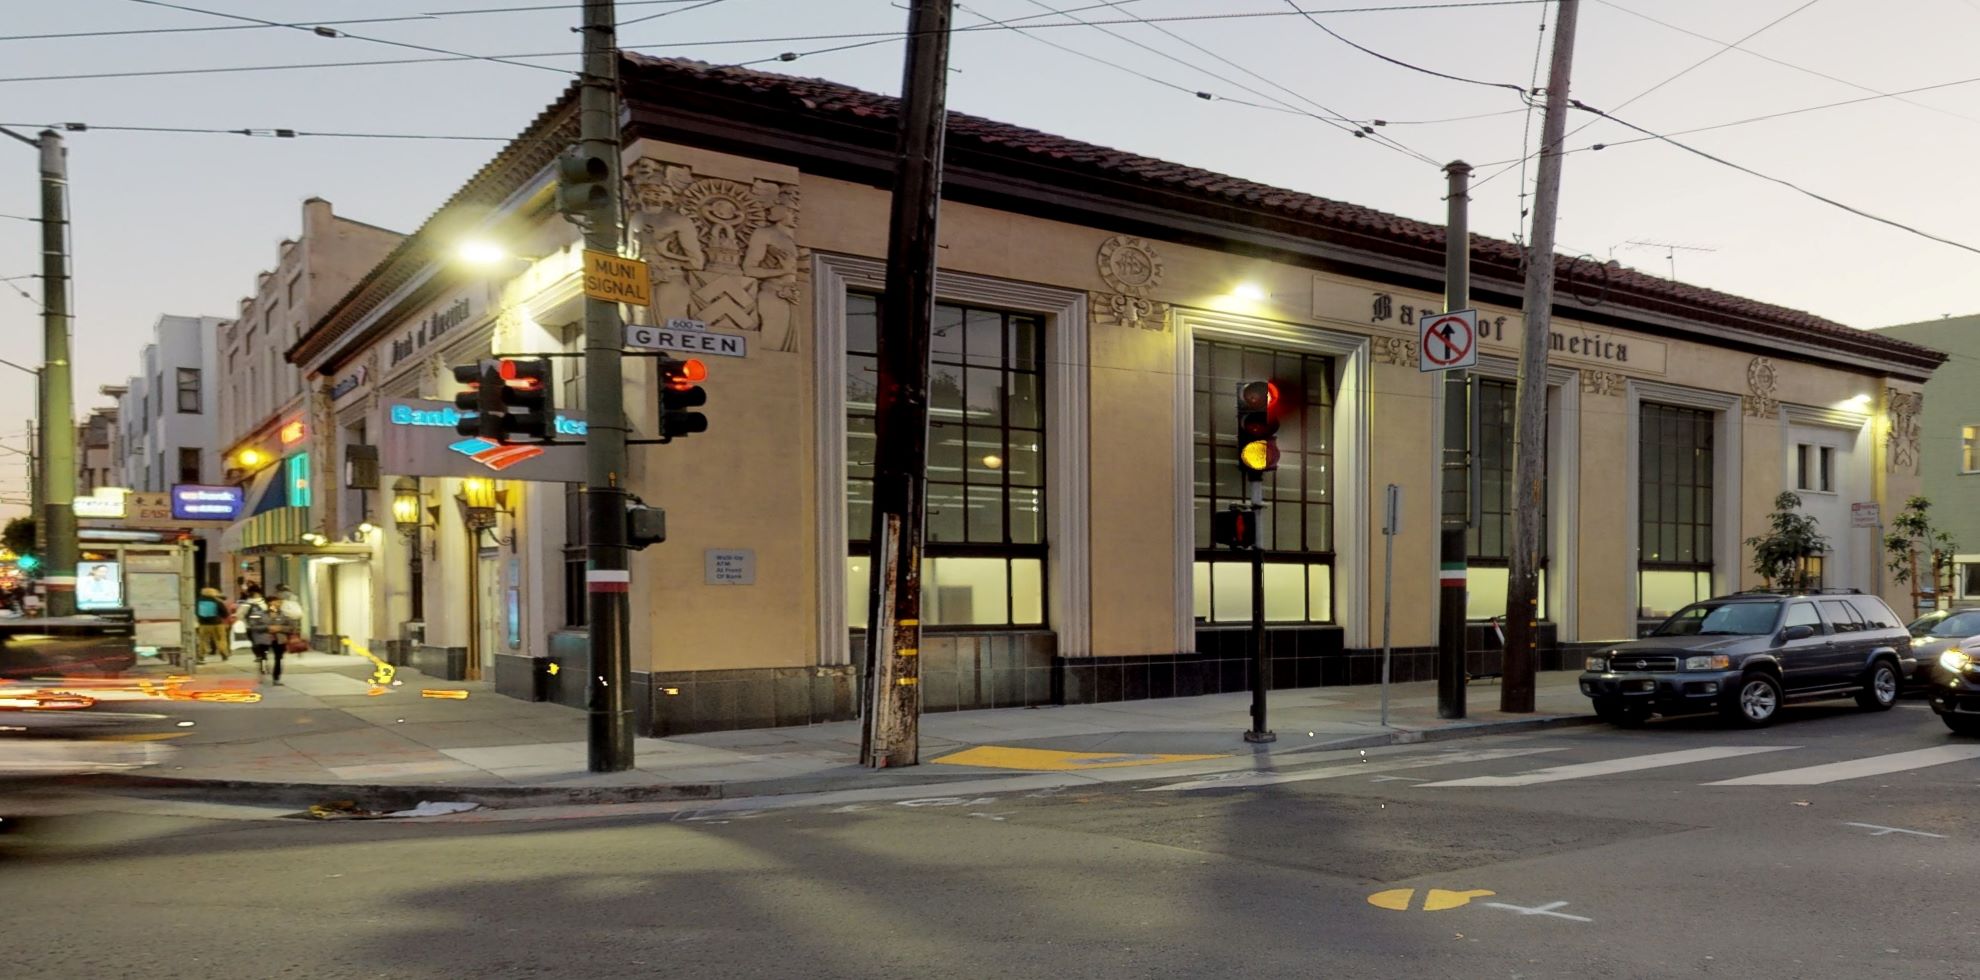 Bank of America financial center with drive-thru ATM | 1455 Stockton St, San Francisco, CA 94133